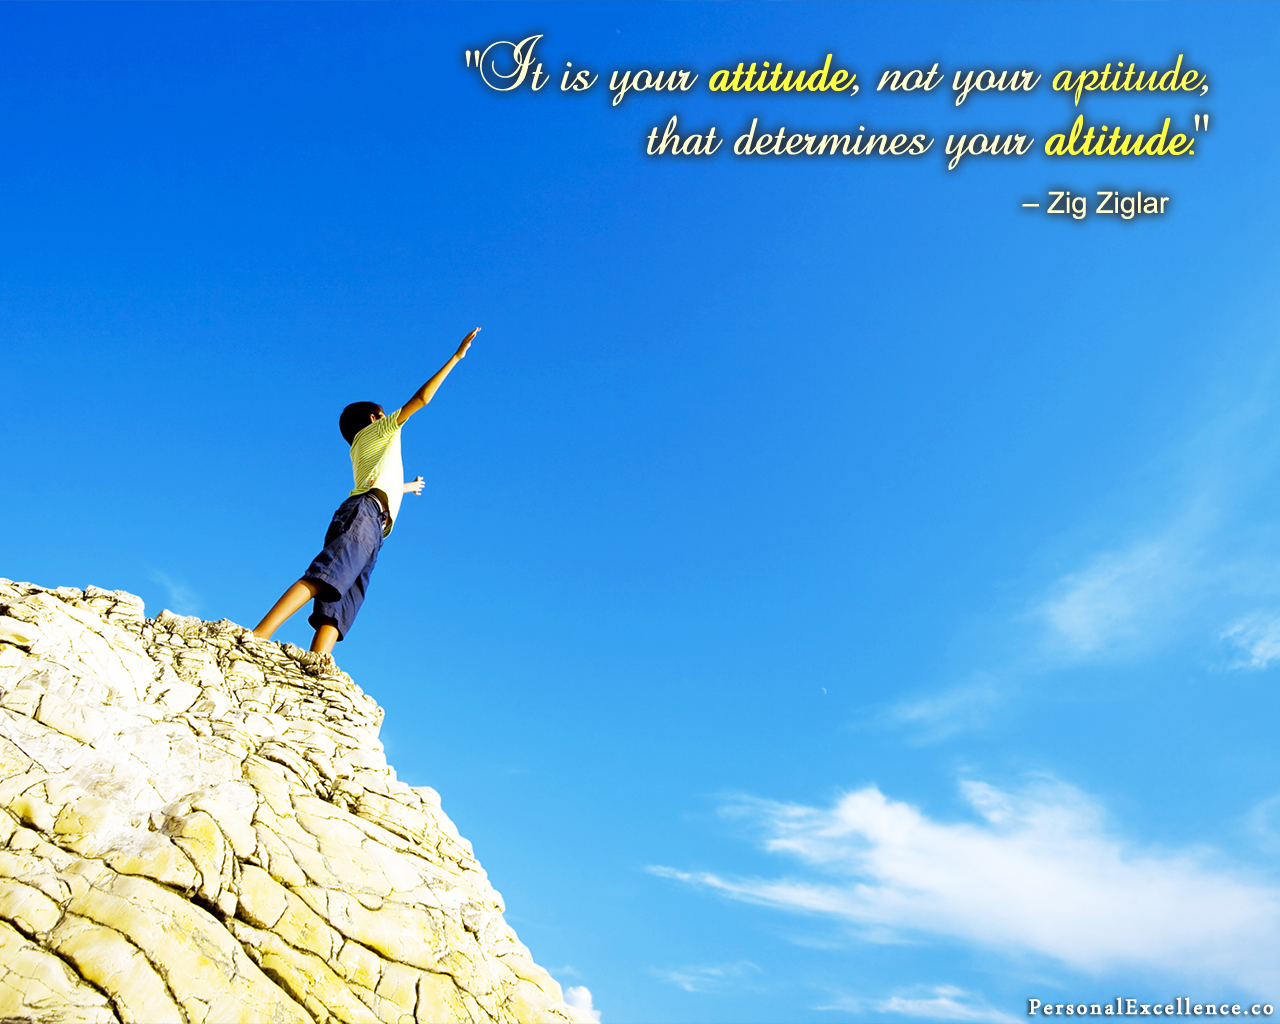 Wallpaper With Attitude Quotes For Boy Not Altitude